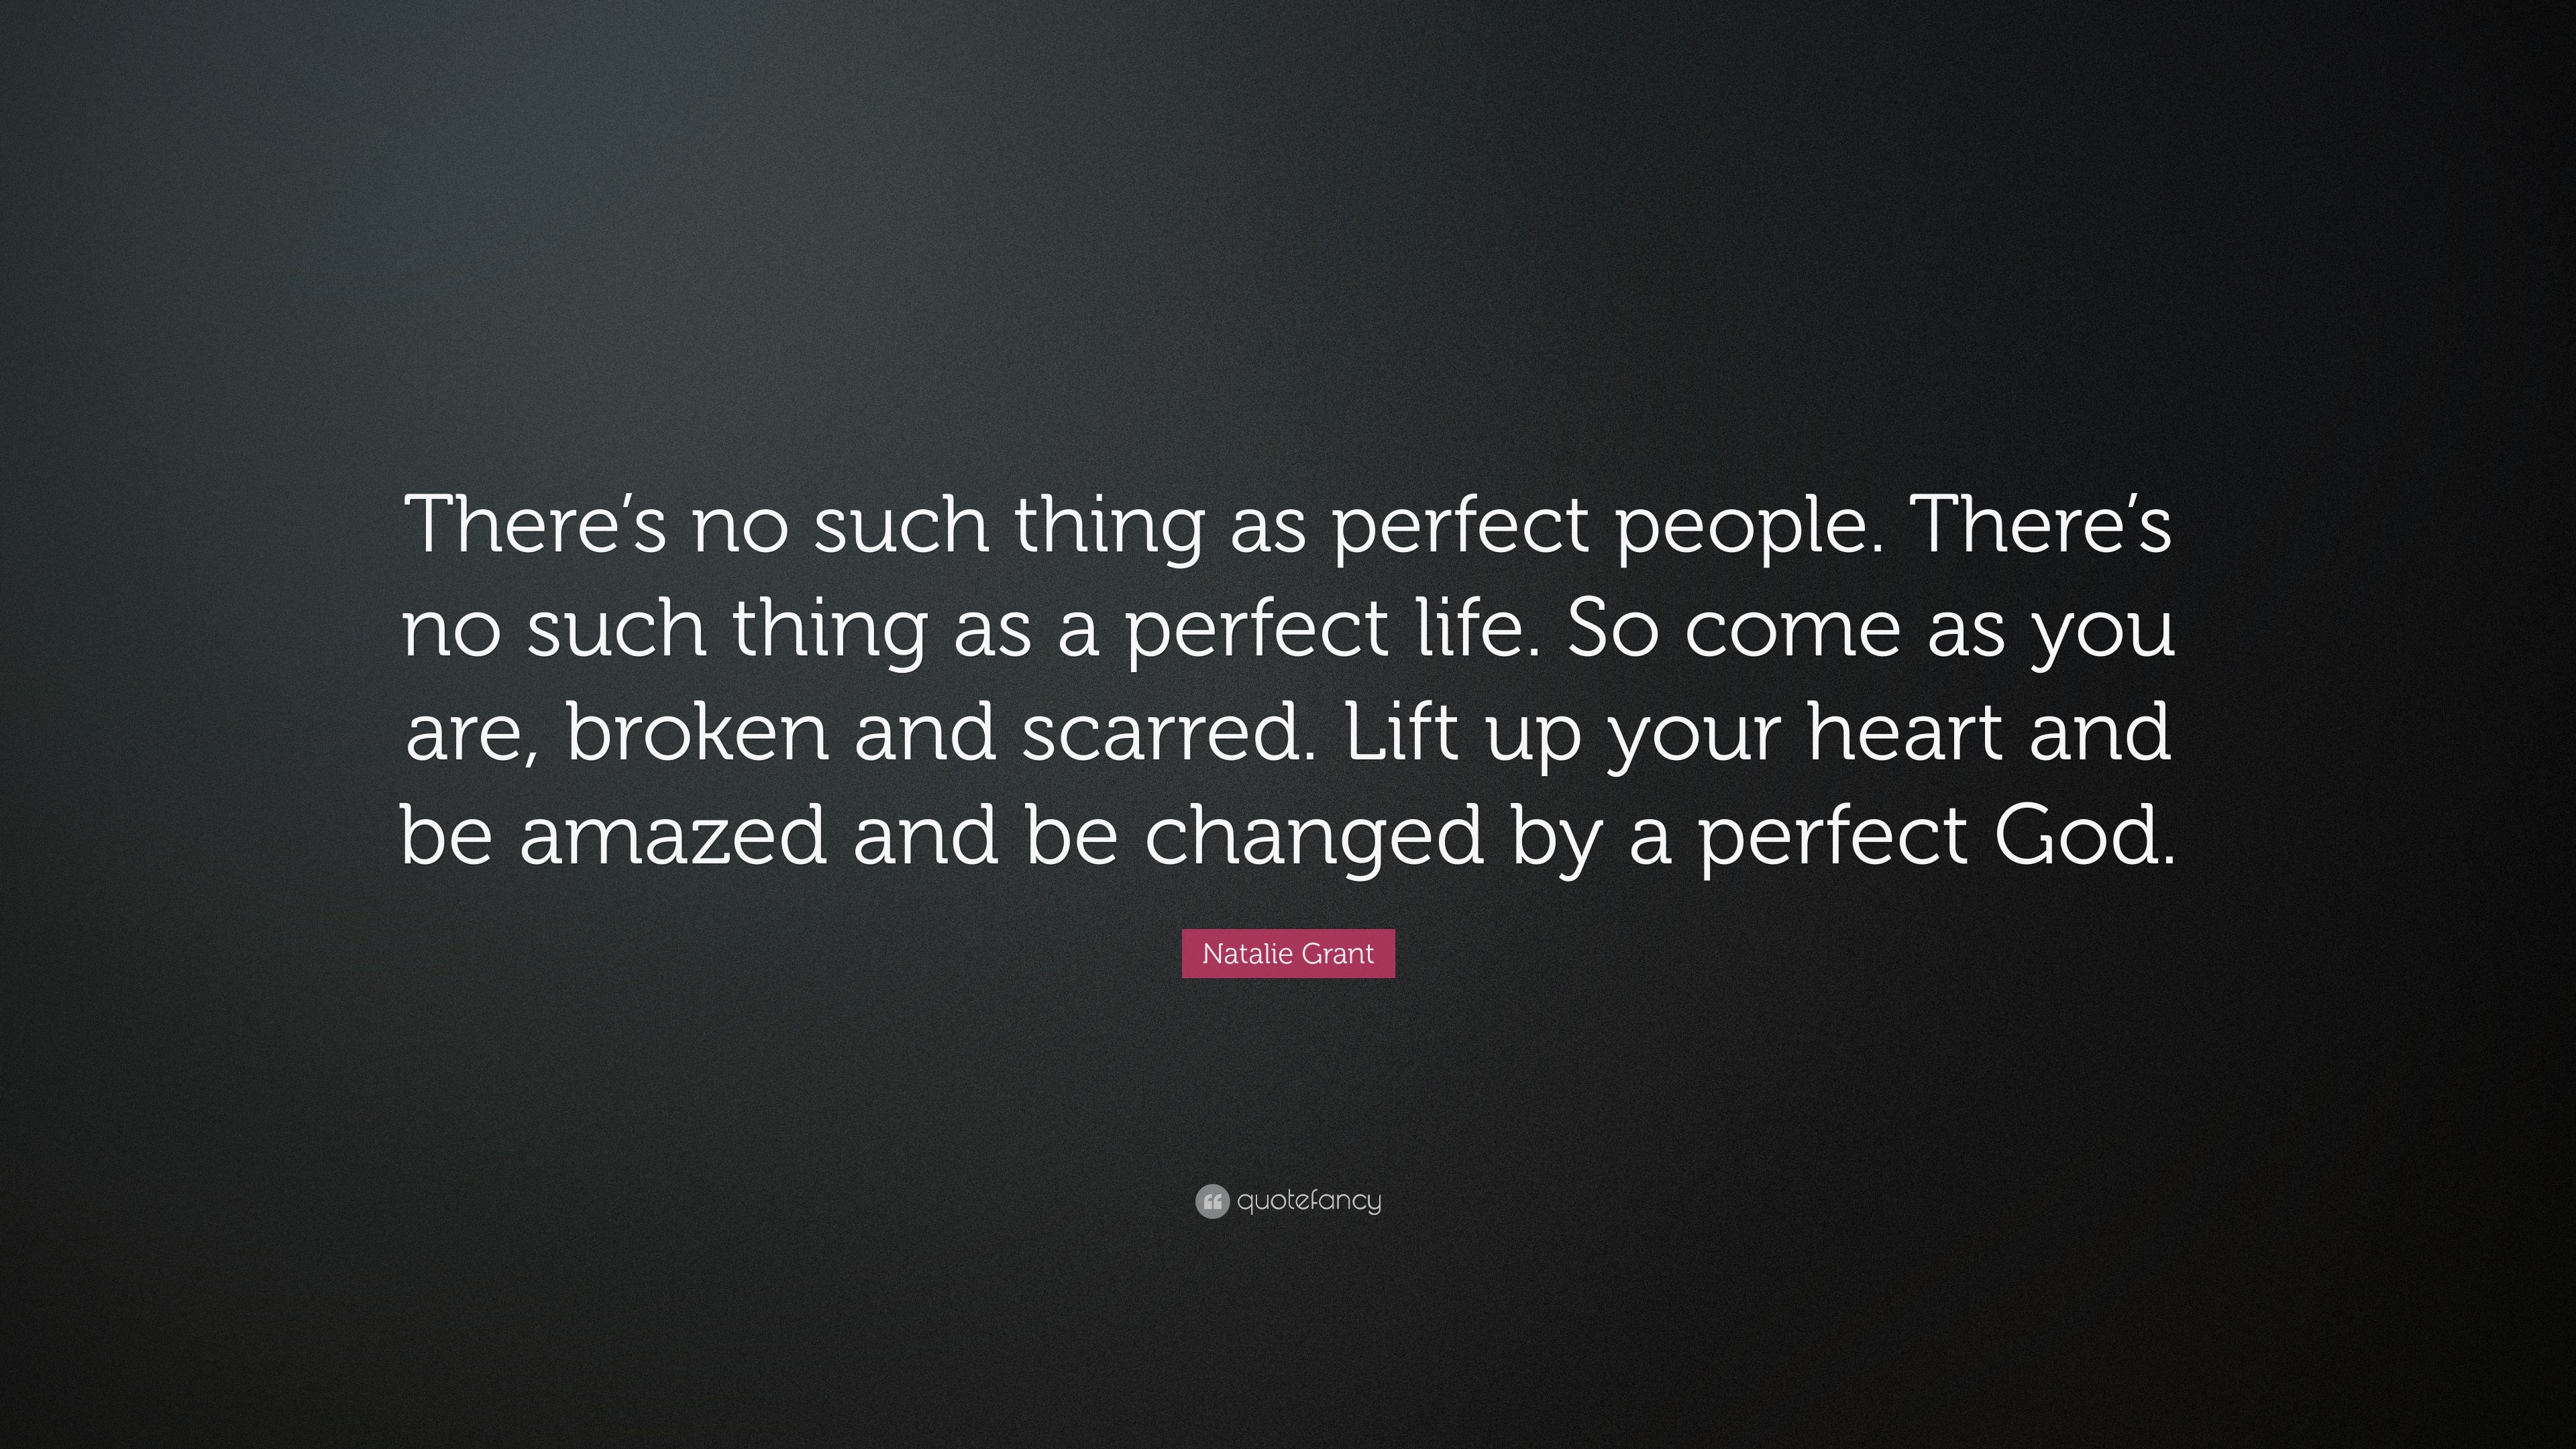 Natalie Grant Quote: “There's no such thing as perfect people. There's no  such thing as a perfect life. So come as you are, broken and scarred”